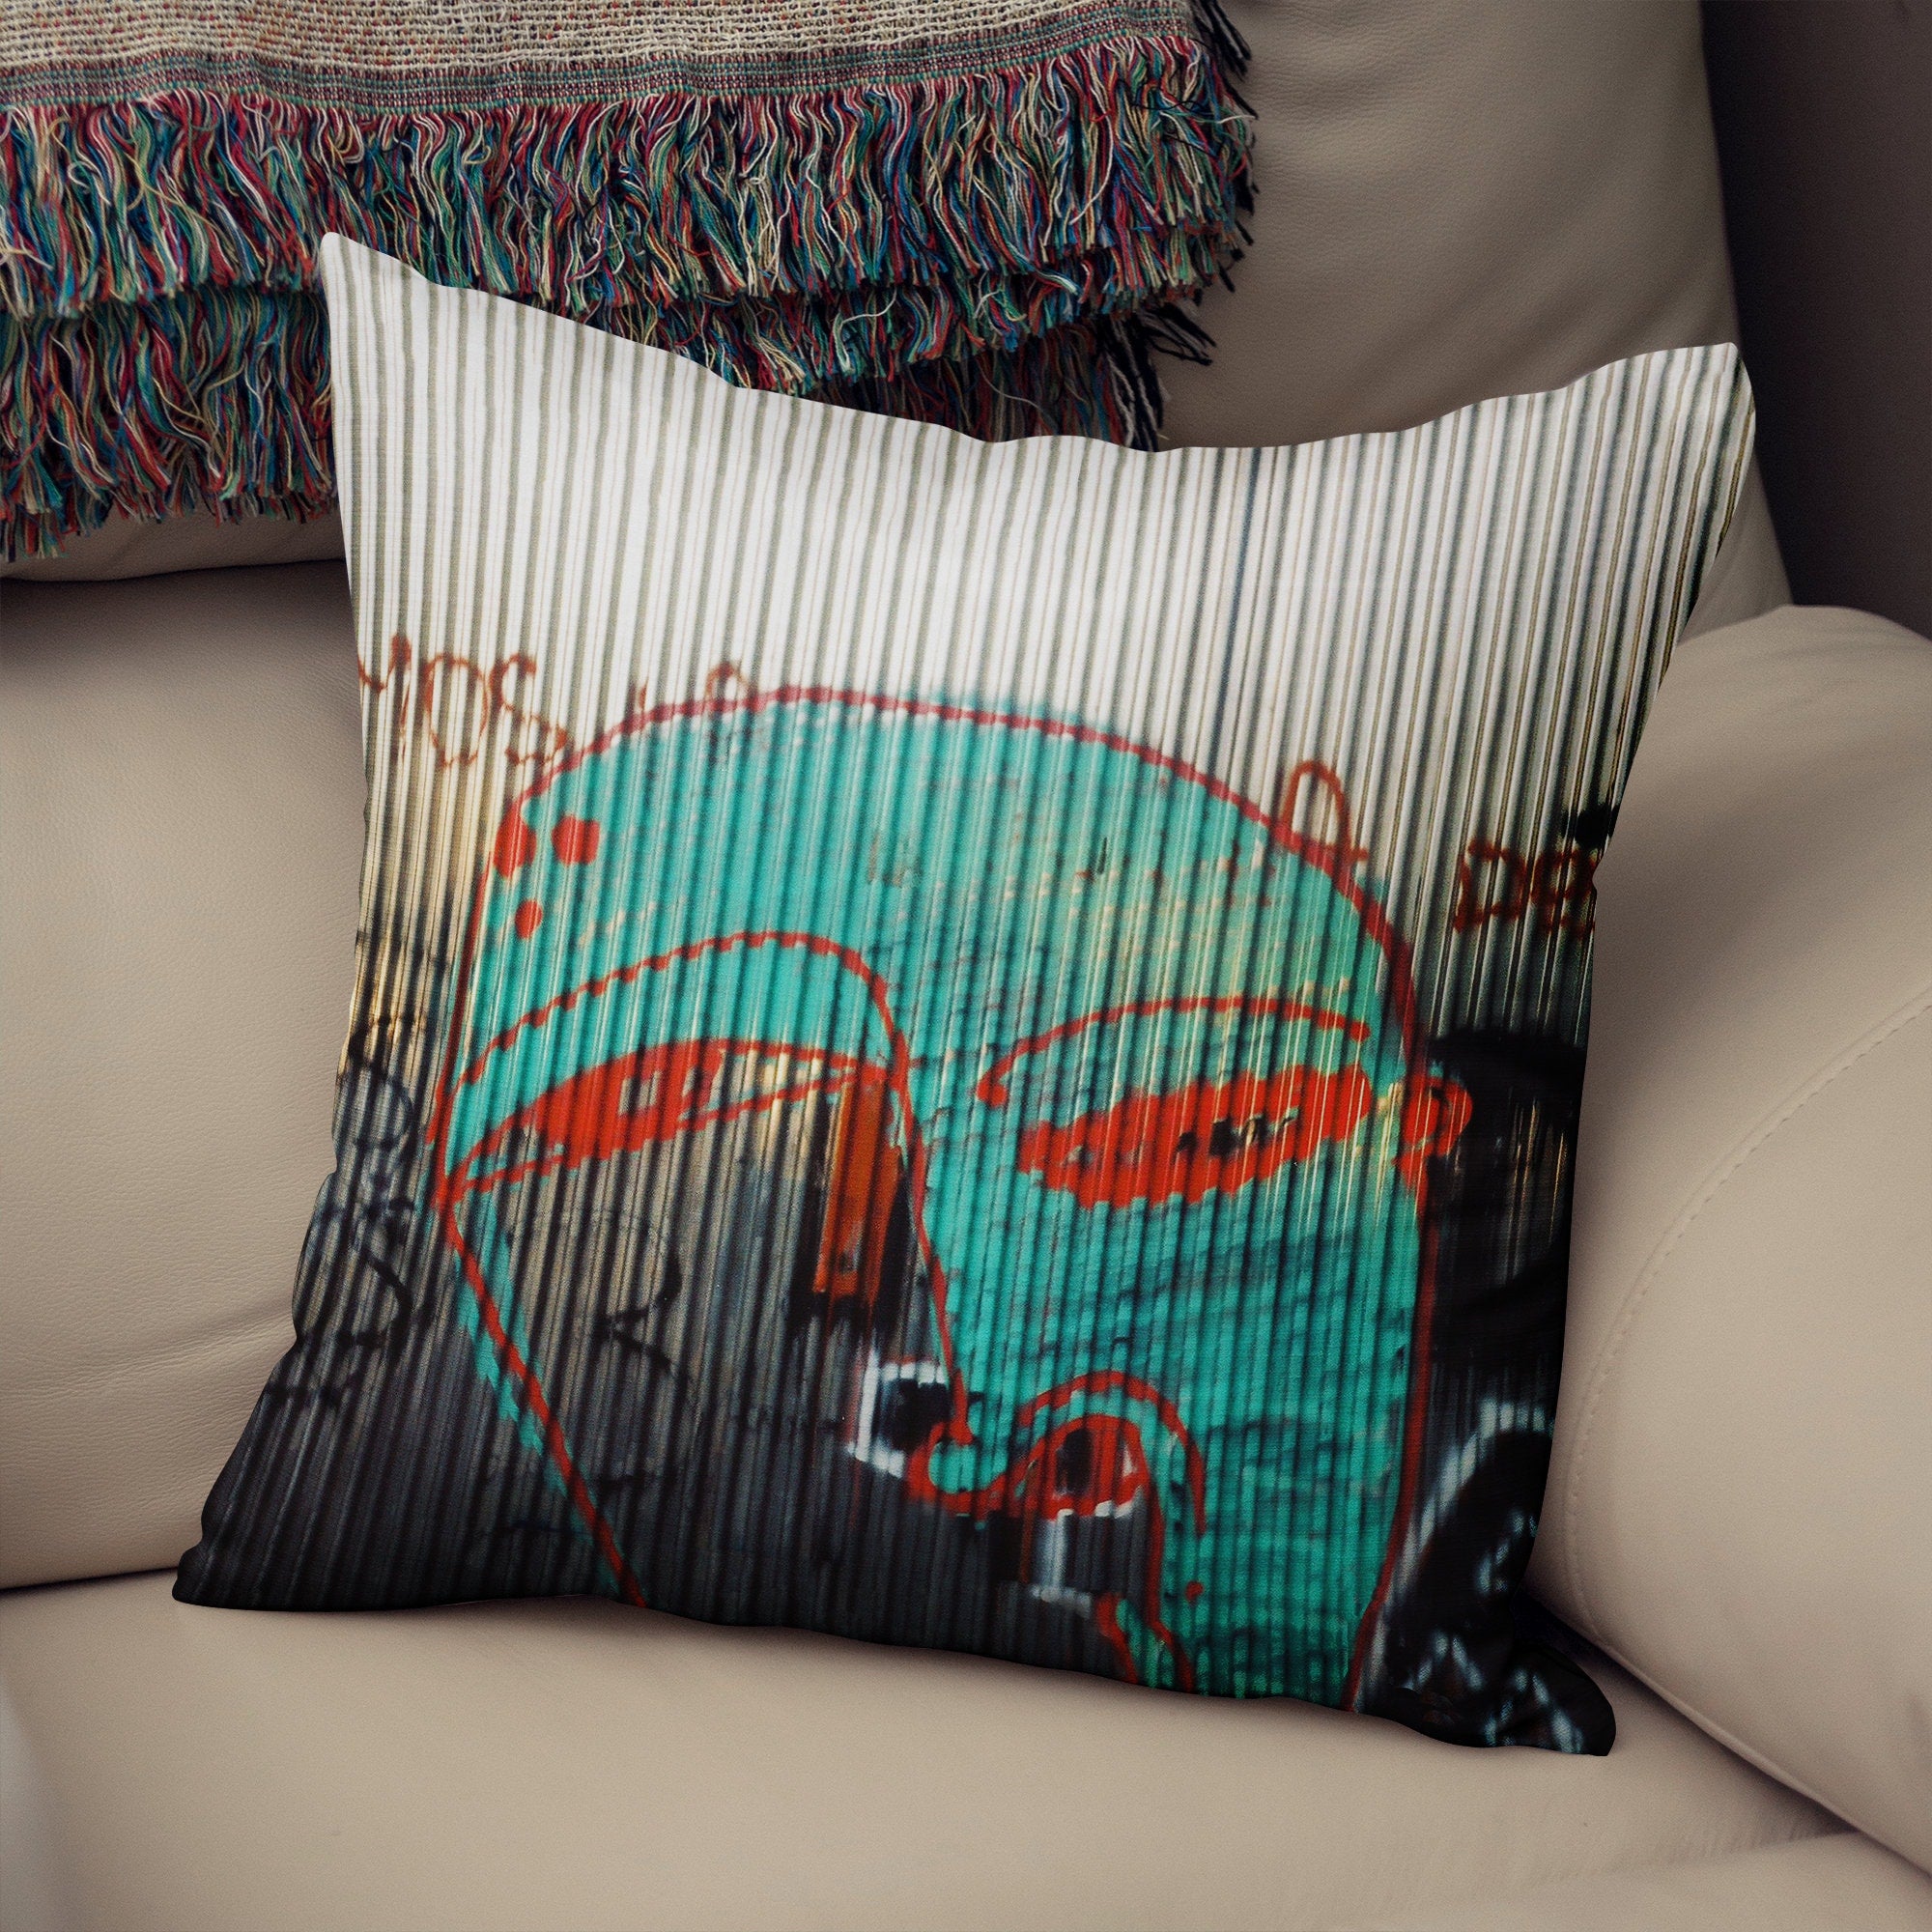 Picasso Face Throw Pillow Cover Graffiti Colorful Blue Case